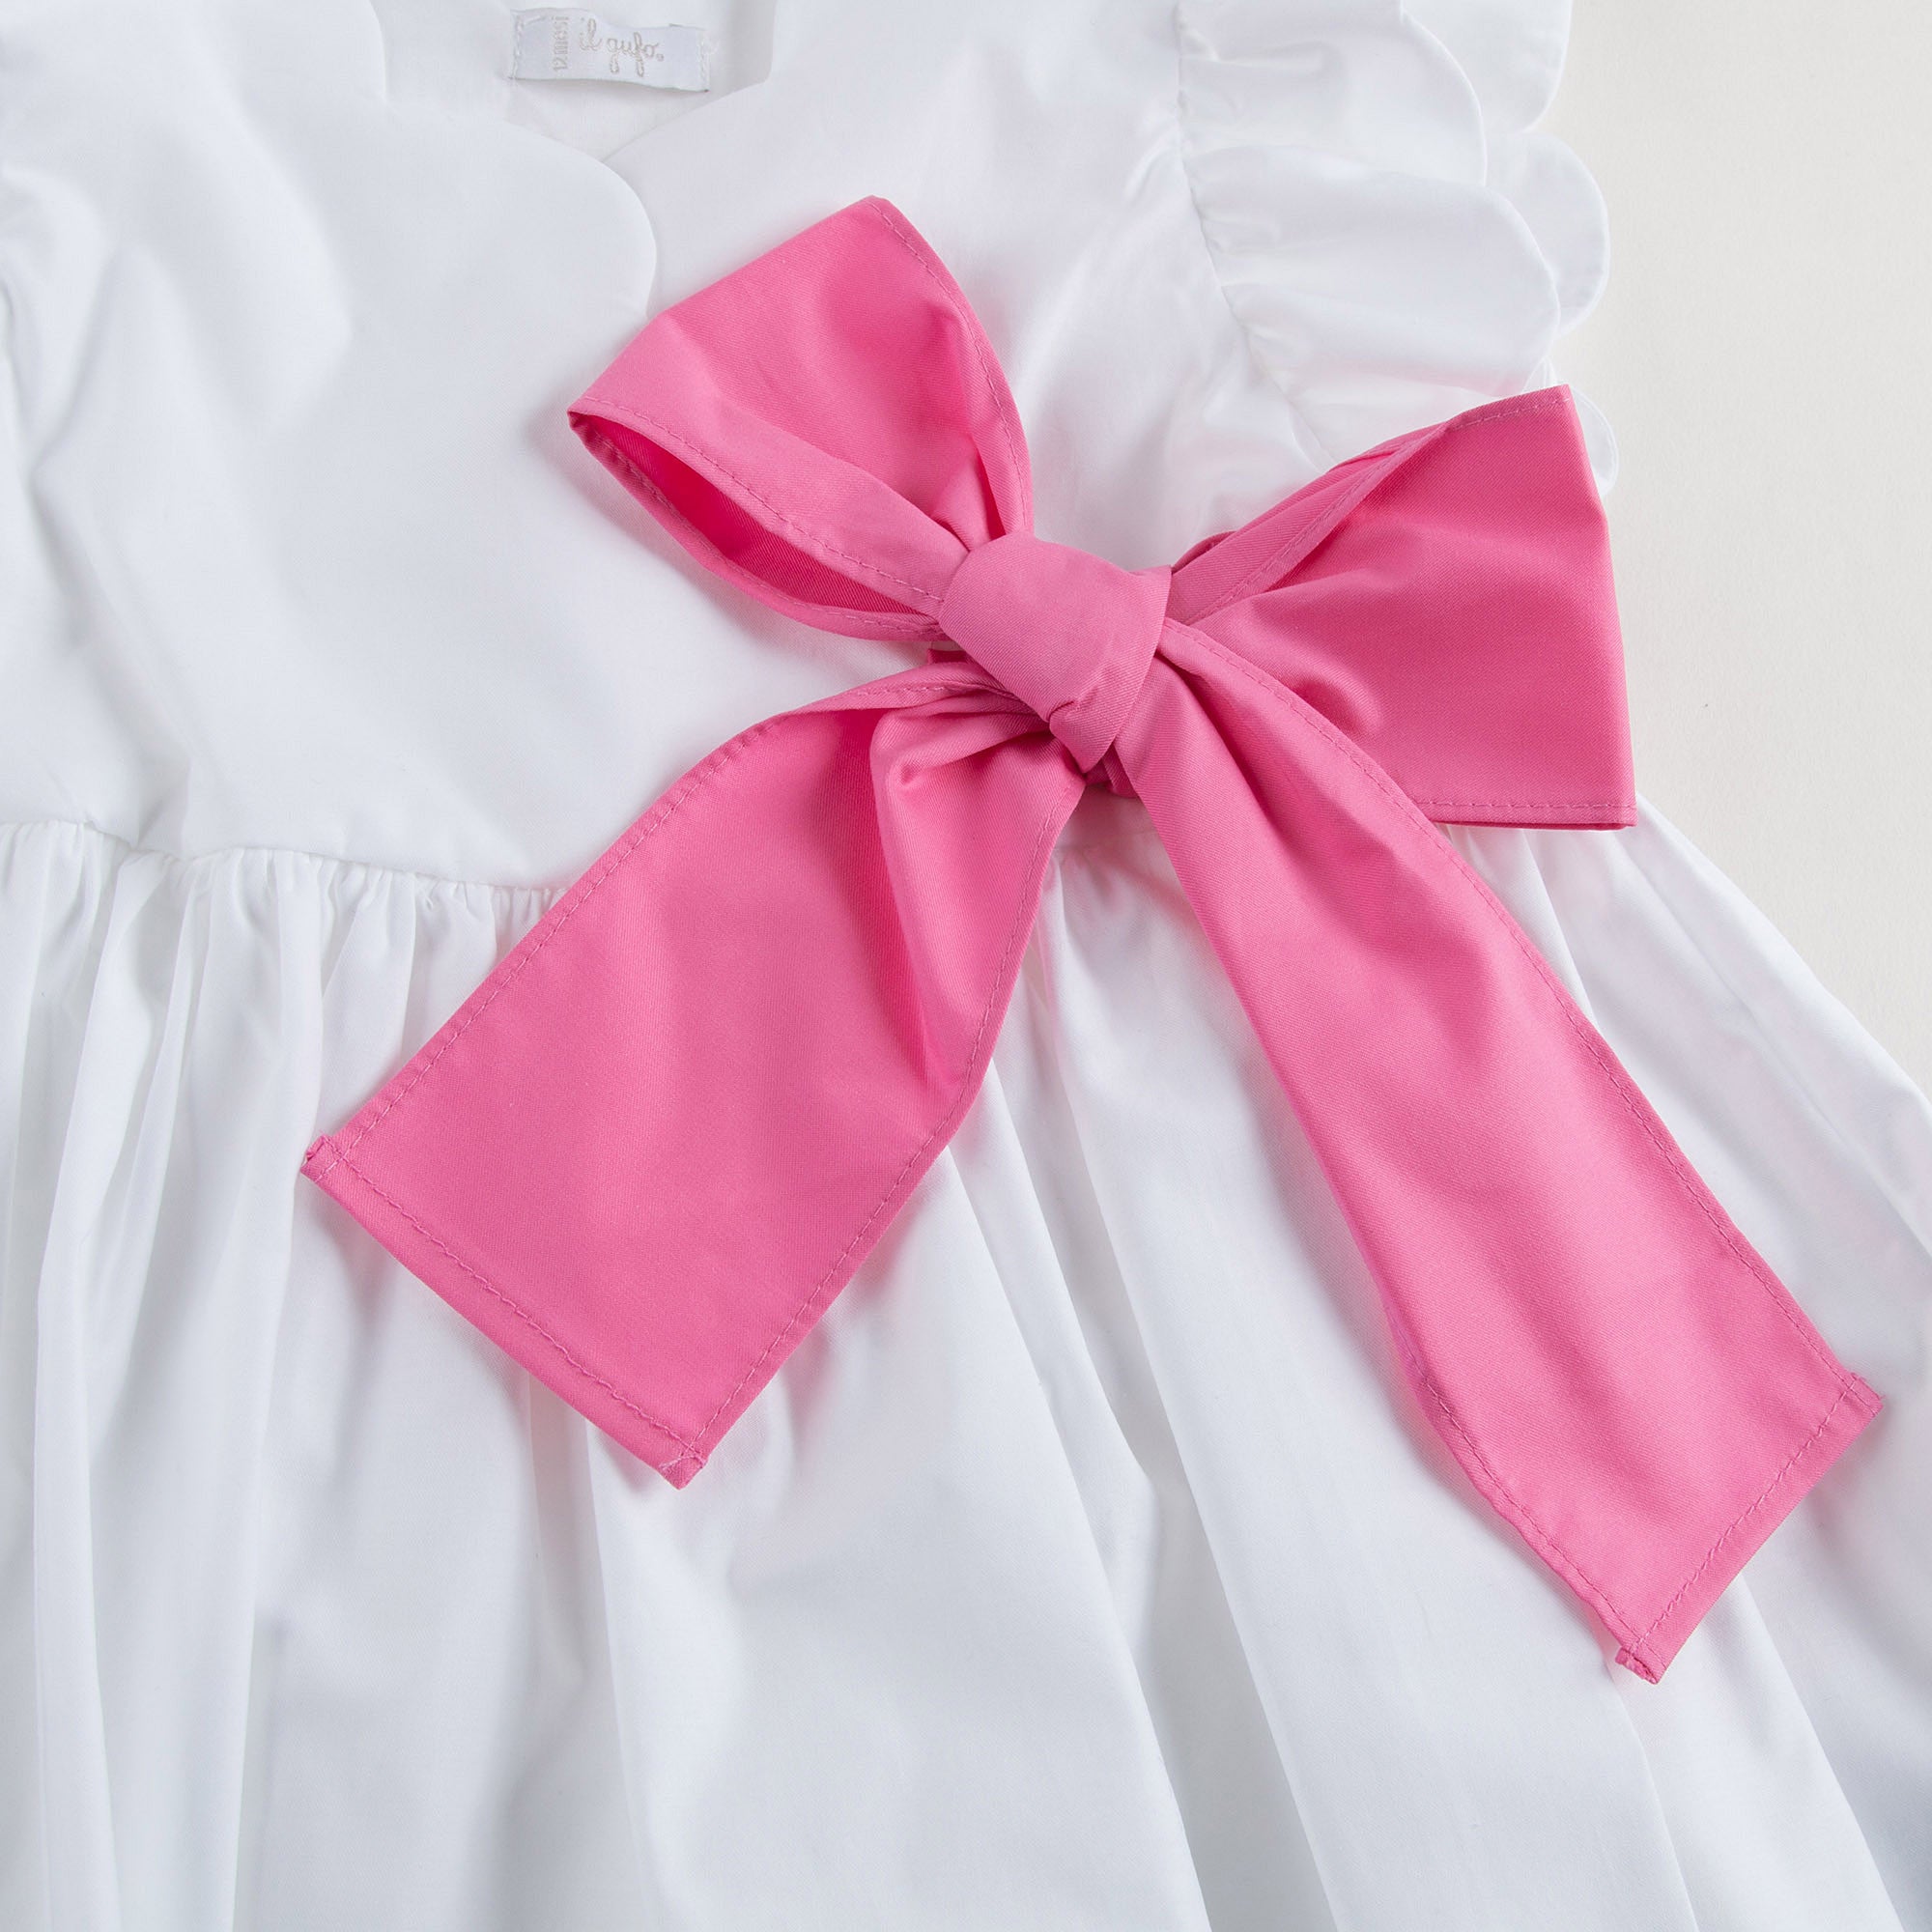 Girls White Cotton Dress with Pink Bow - CÉMAROSE | Children's Fashion Store - 5